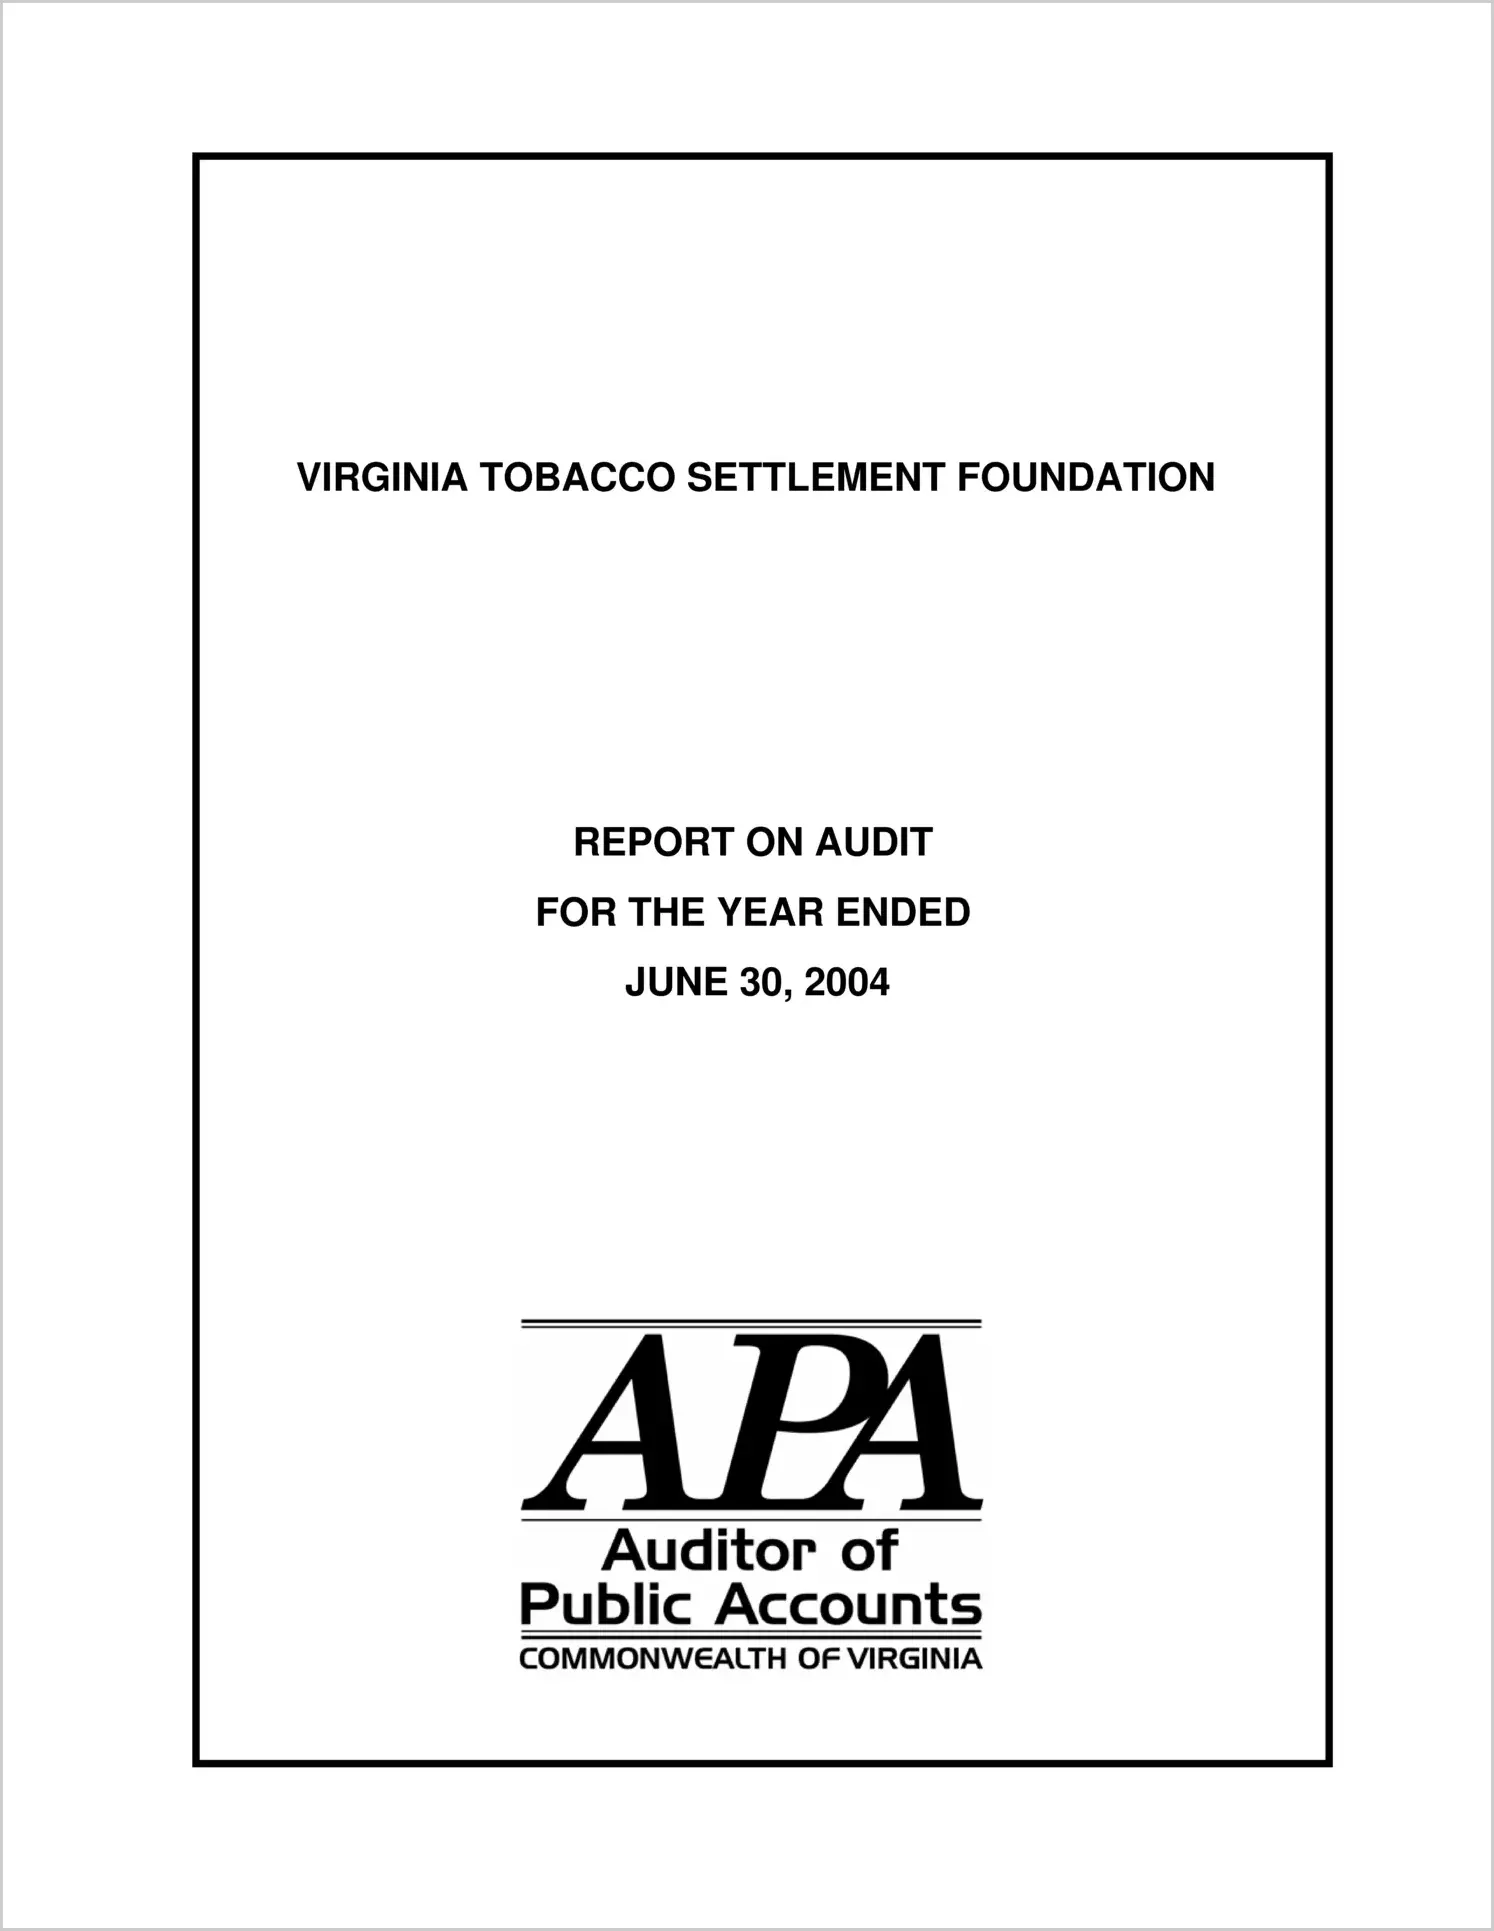 Virginia Tobacco Settlement Foundation for the year ended June 30, 2004